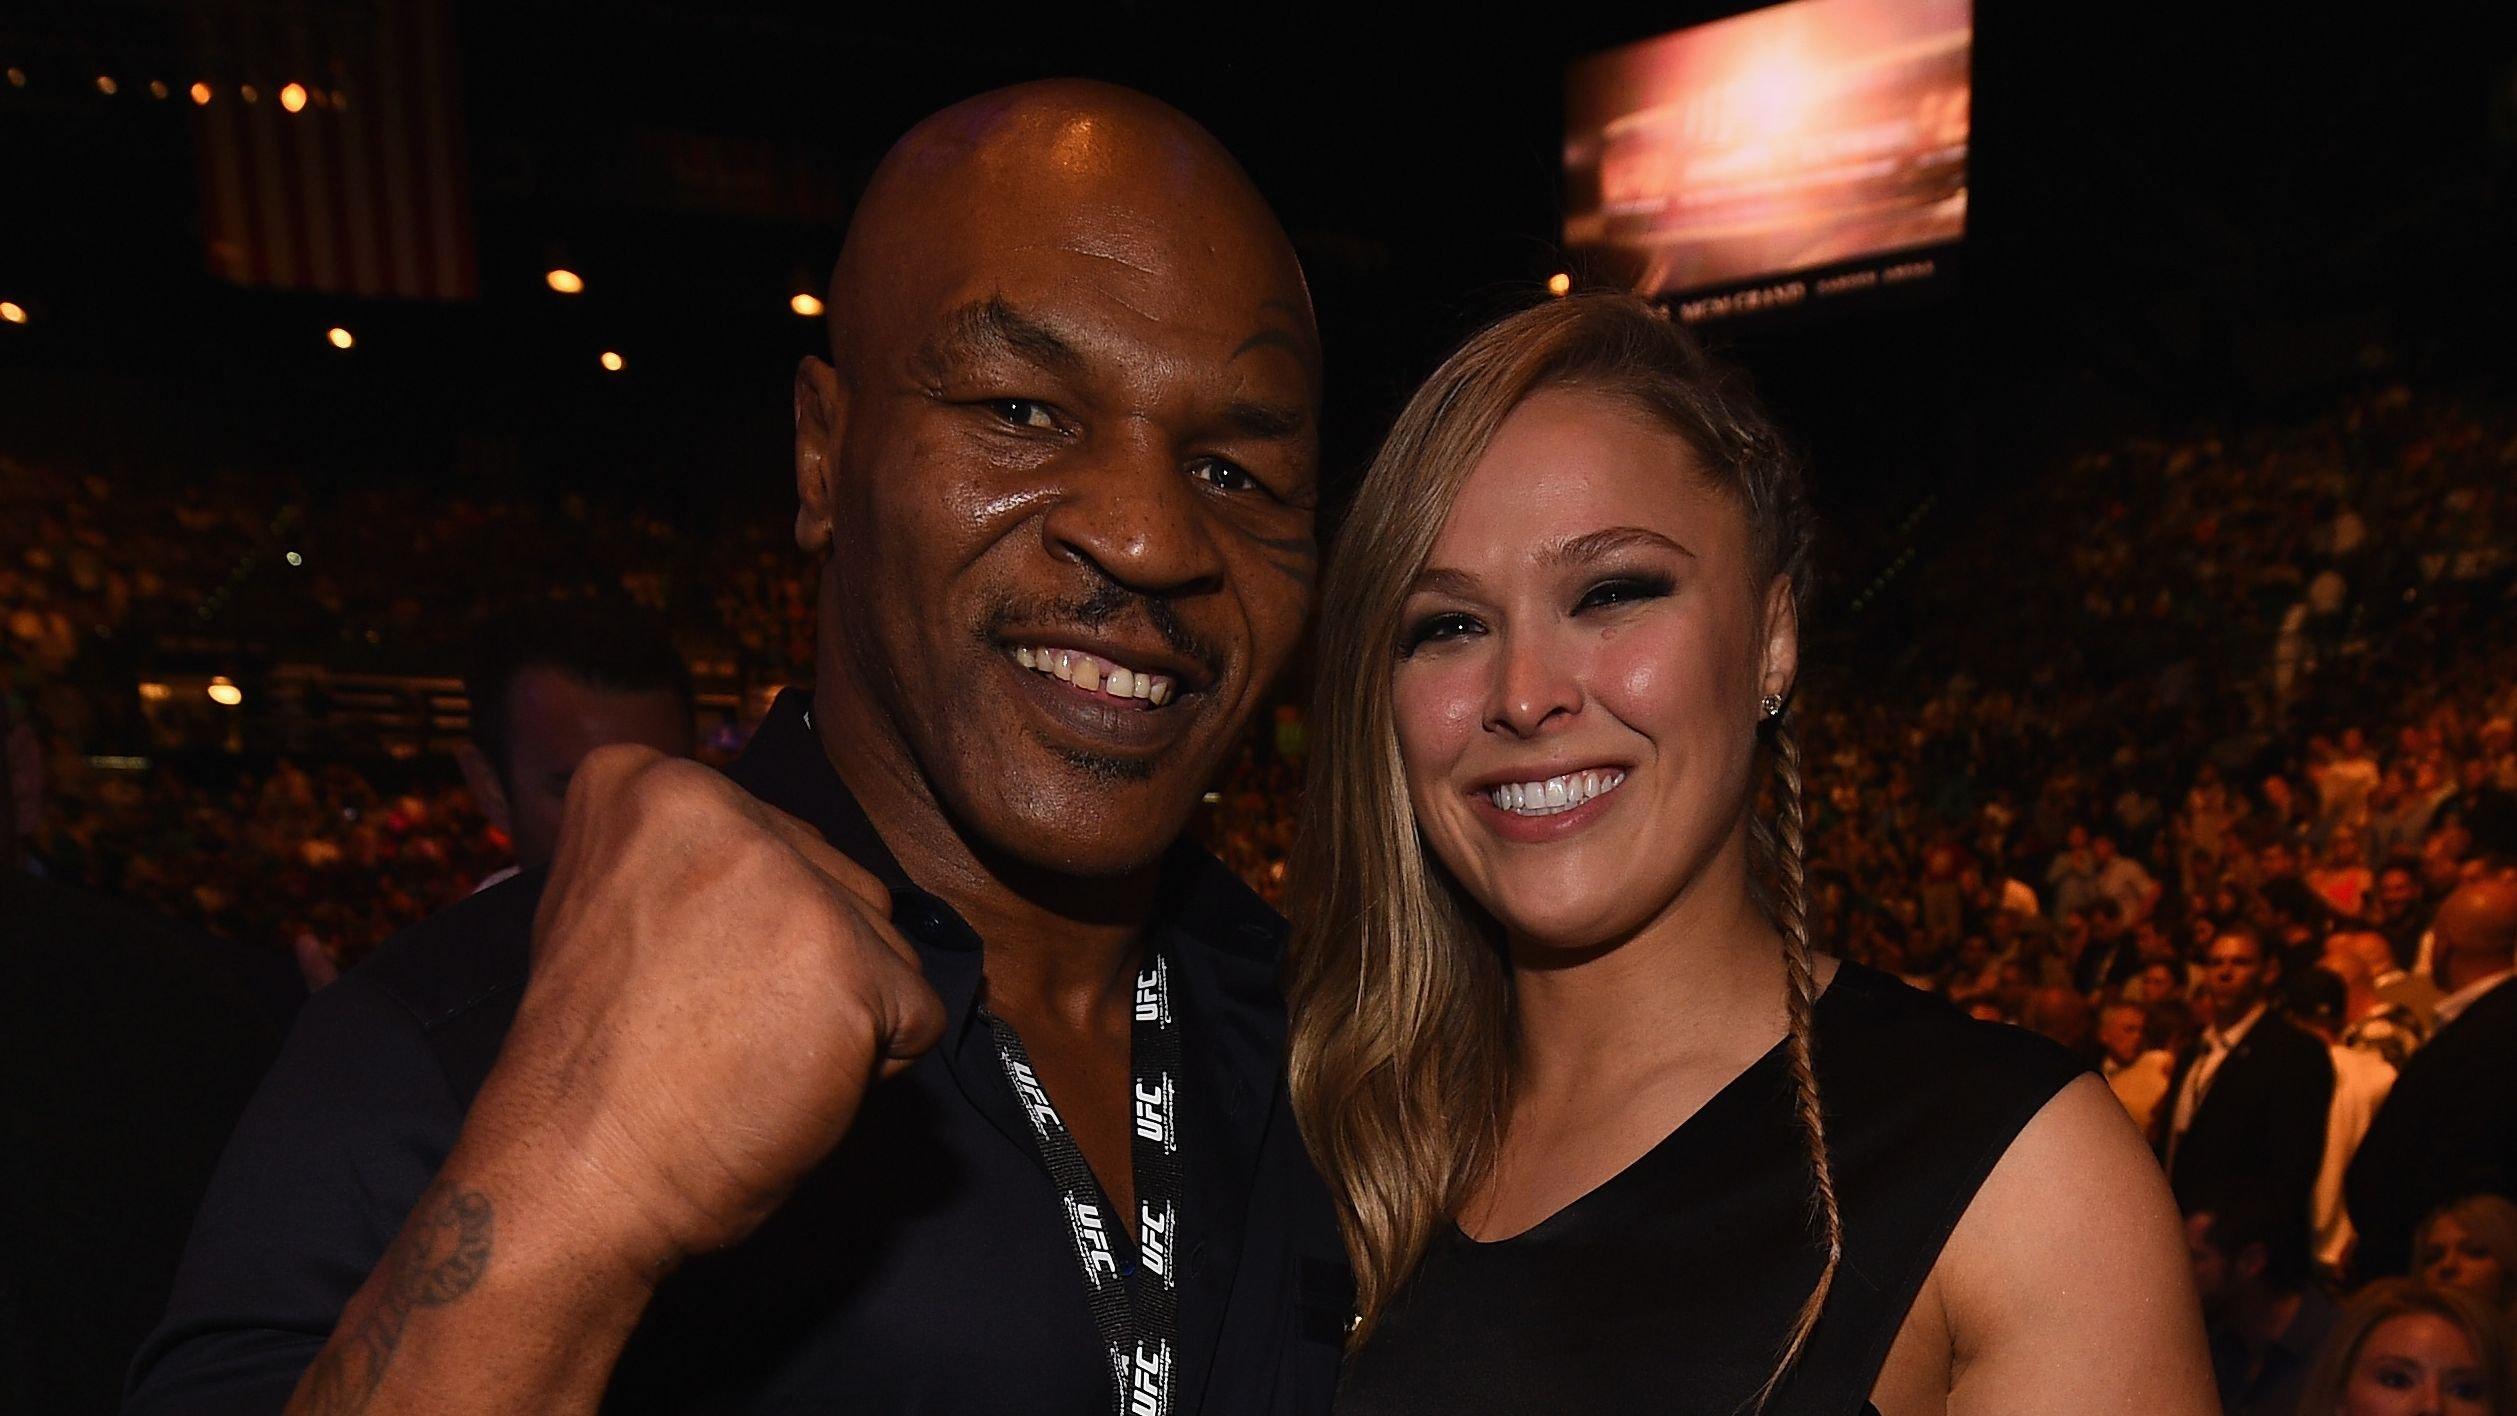 Ronda Rousey and Mike Tyson